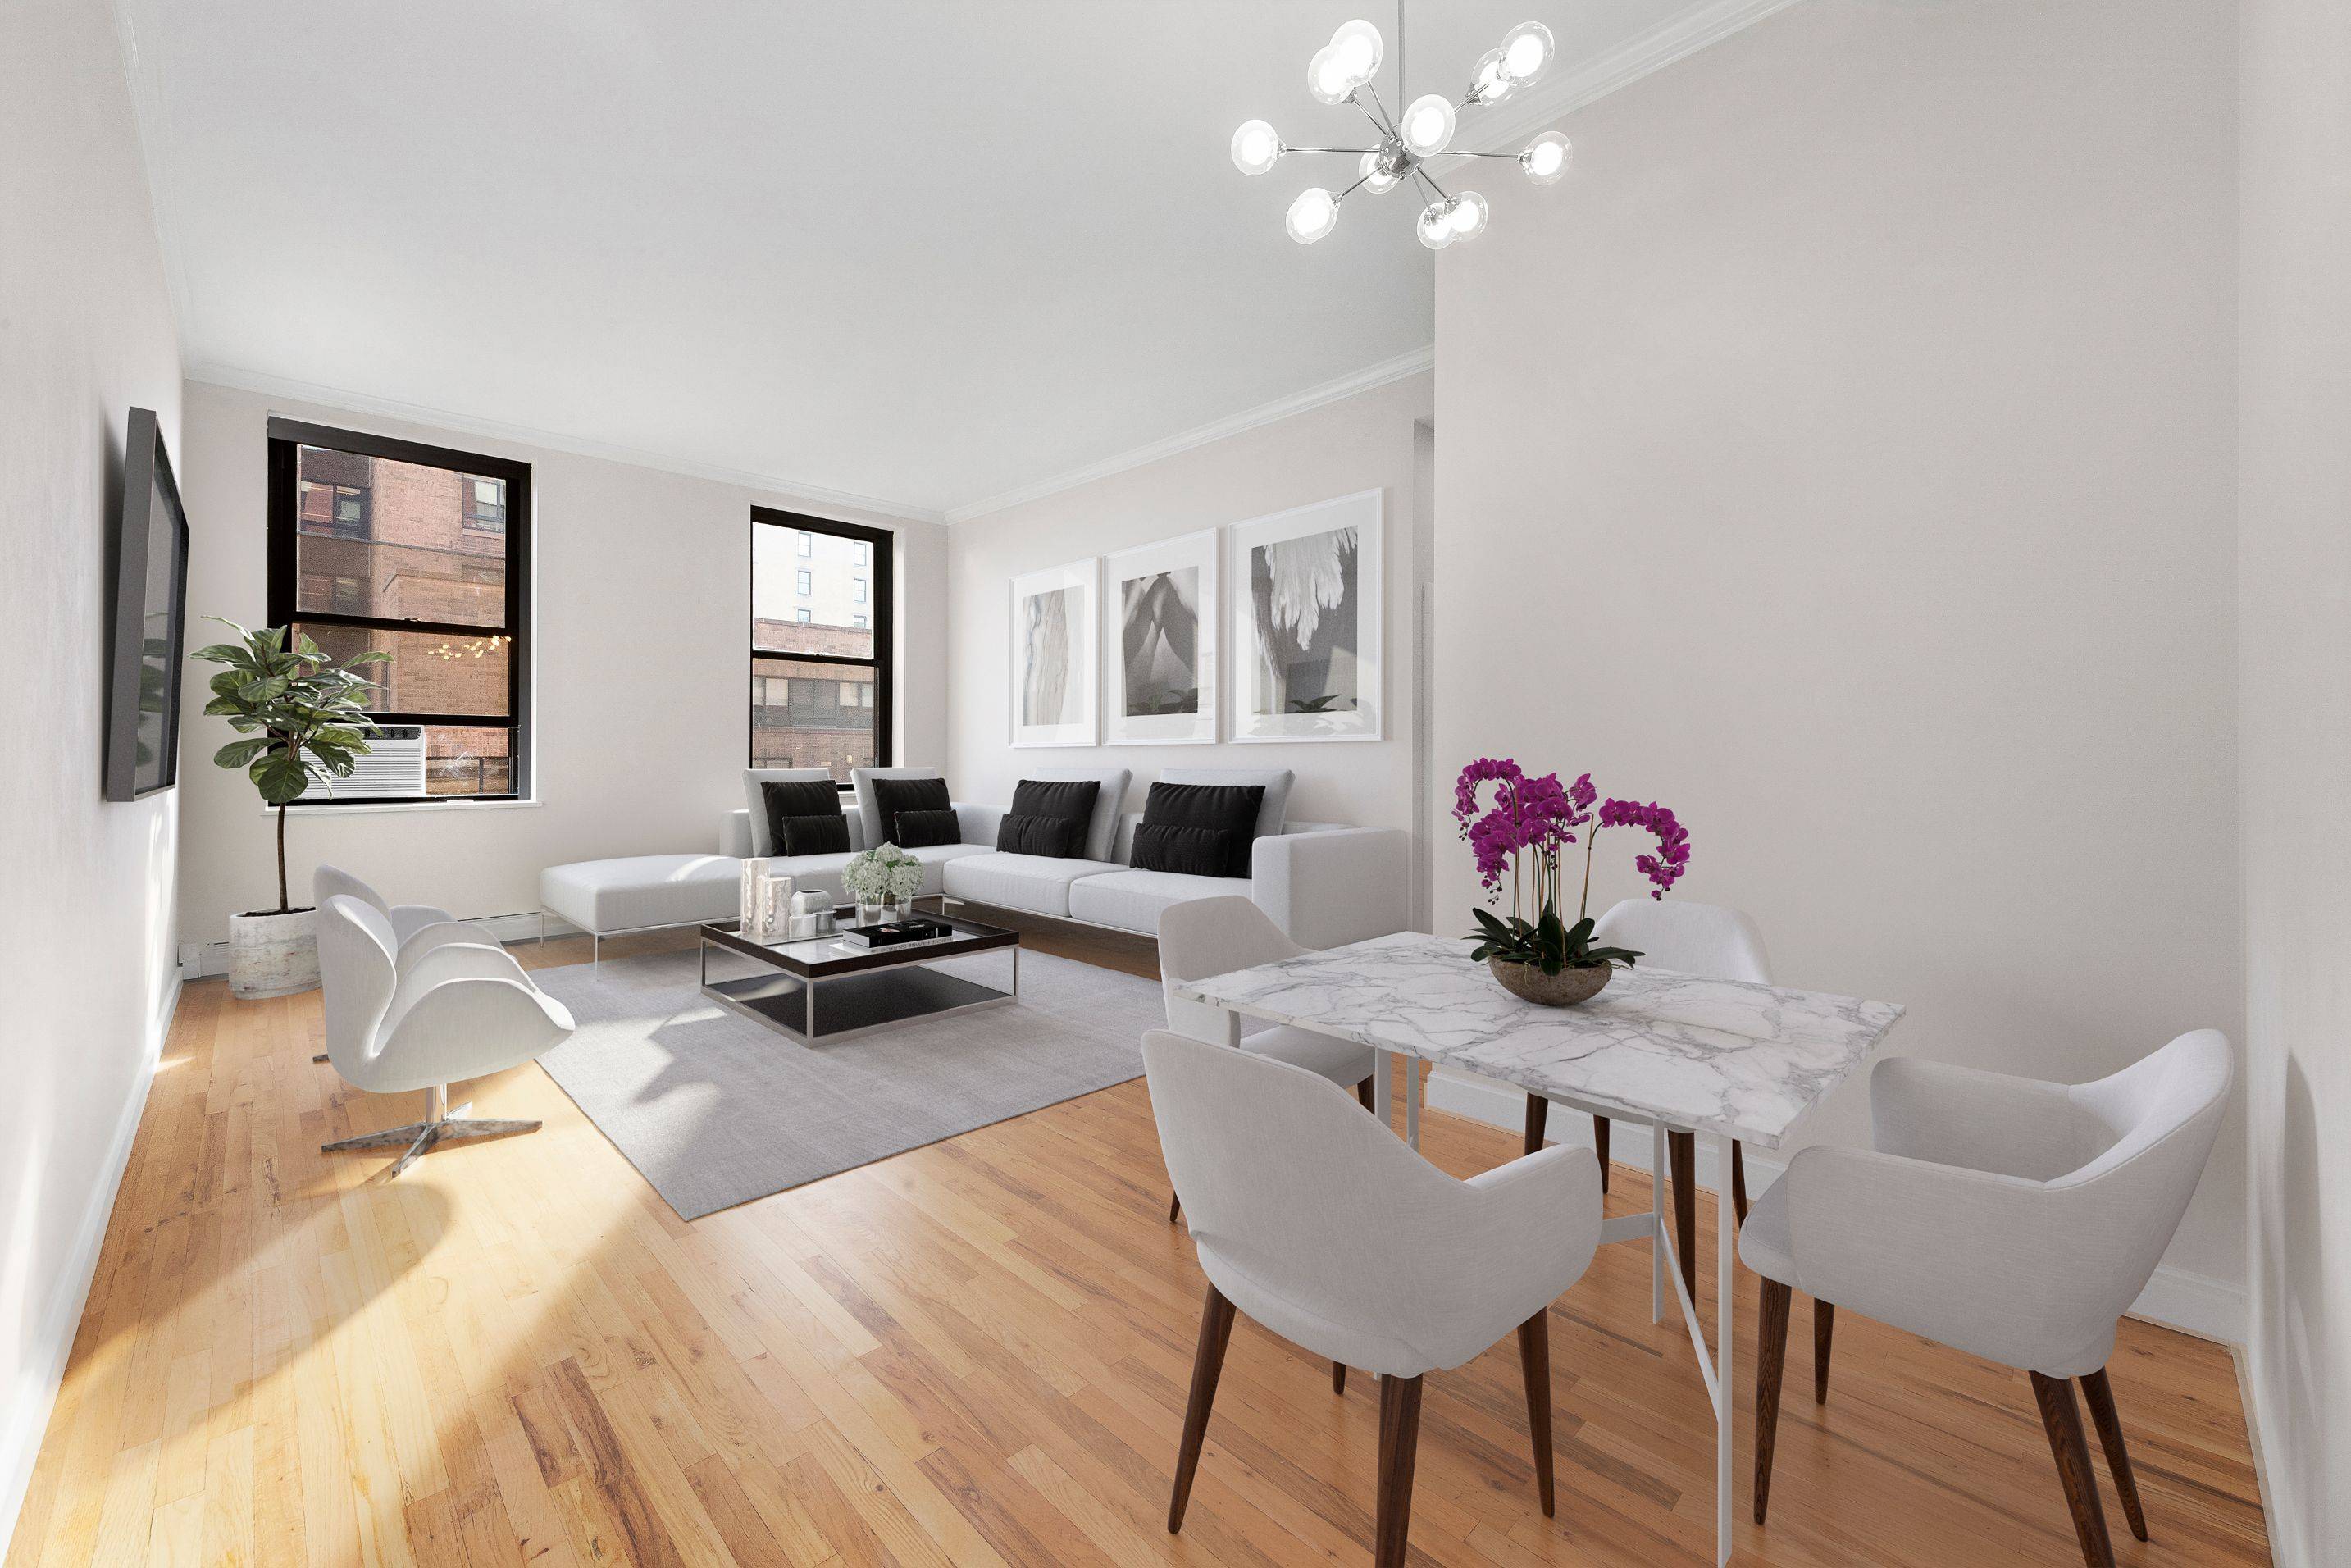 Mint Sun Flooded Large One Bedroom Loft with Home Office Alcove and Soaring 11 foot ceilings in a Full Service Iconic Building in Noho/Greenwich Village.